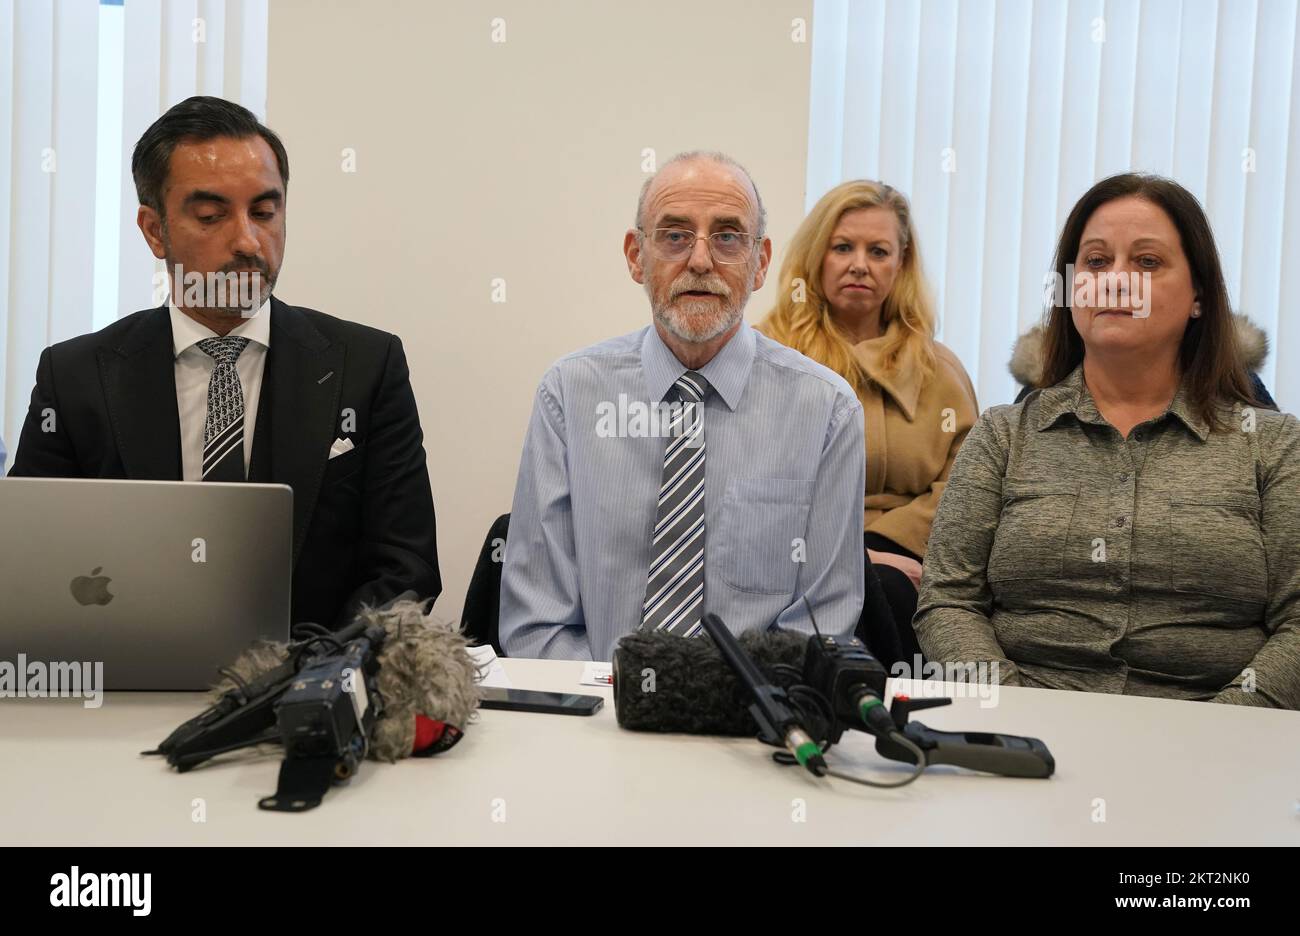 Lawyer Aamer Anwar alongside Alan Wightman(c) and Helen Lee Keenan(r) from the Scottish members of the Covid-19 Bereaved Families for Justice group during a press conference at the Leonardo Hotel, Edinburgh, after they met Lord Brailsford, the new chair of the Scottish Covid-19 public inquiry. Picture date: Tuesday November 29, 2022. Stock Photo